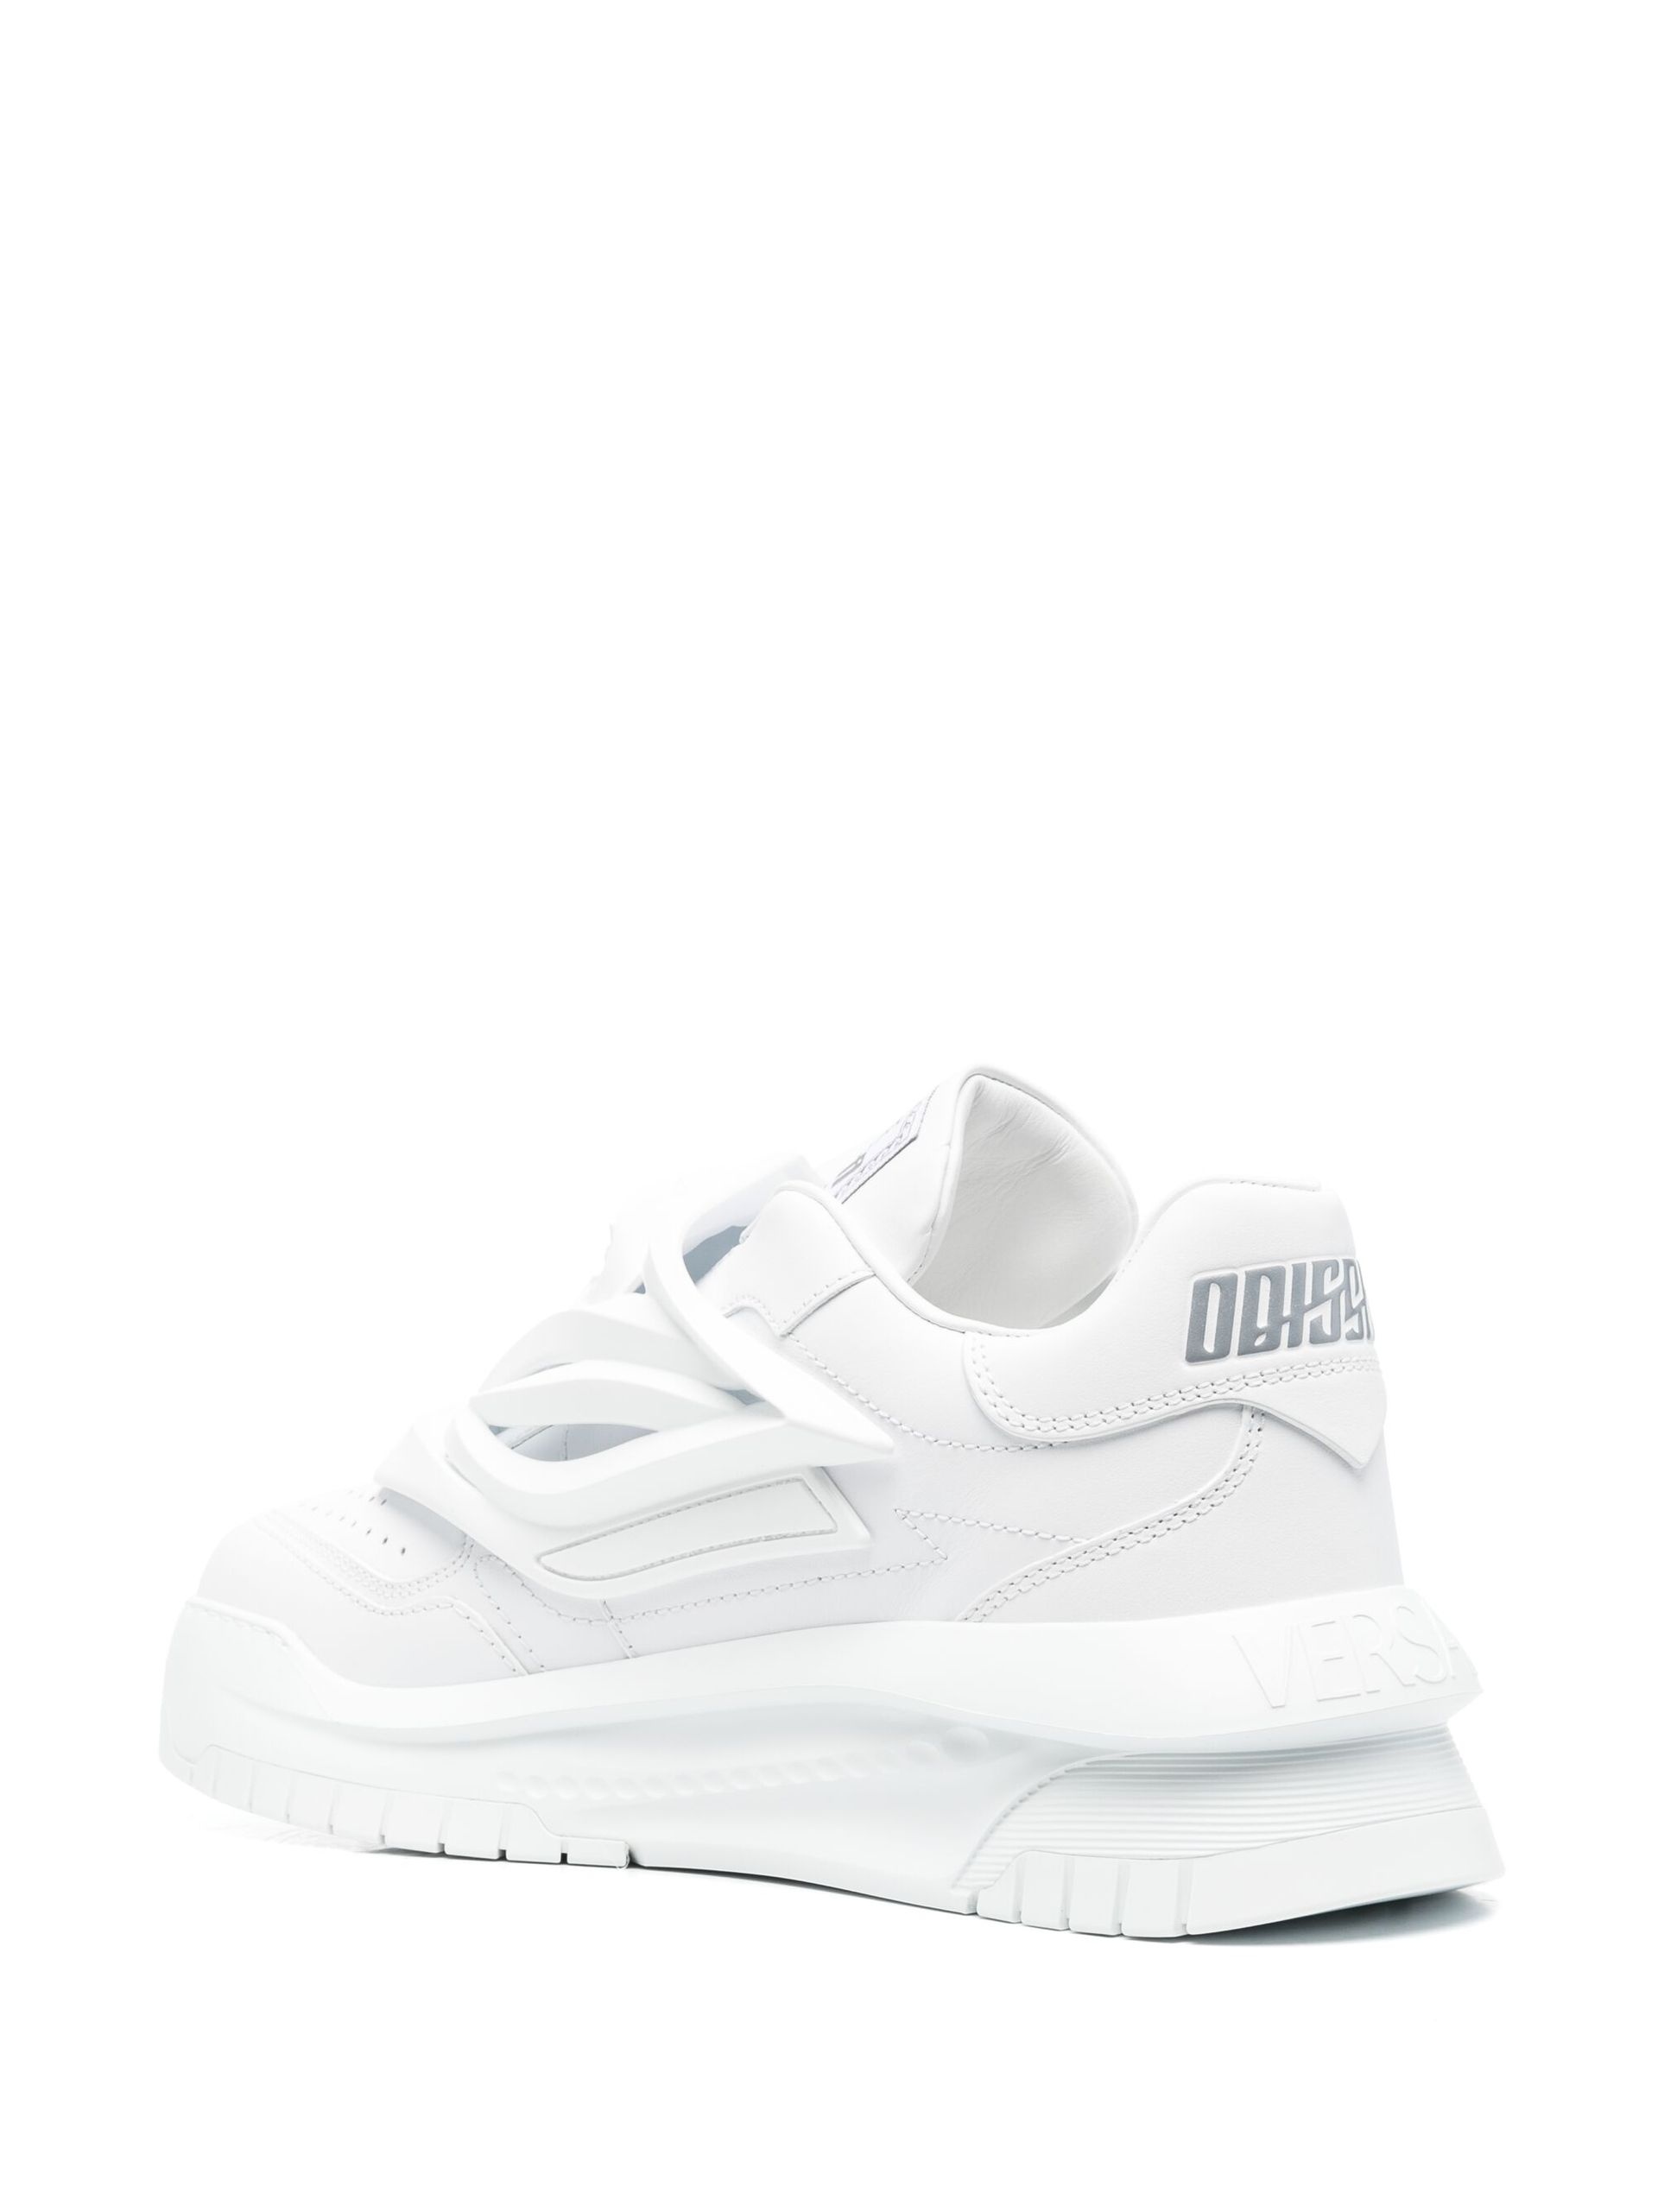 White Odissea Leather Sneakers - 3